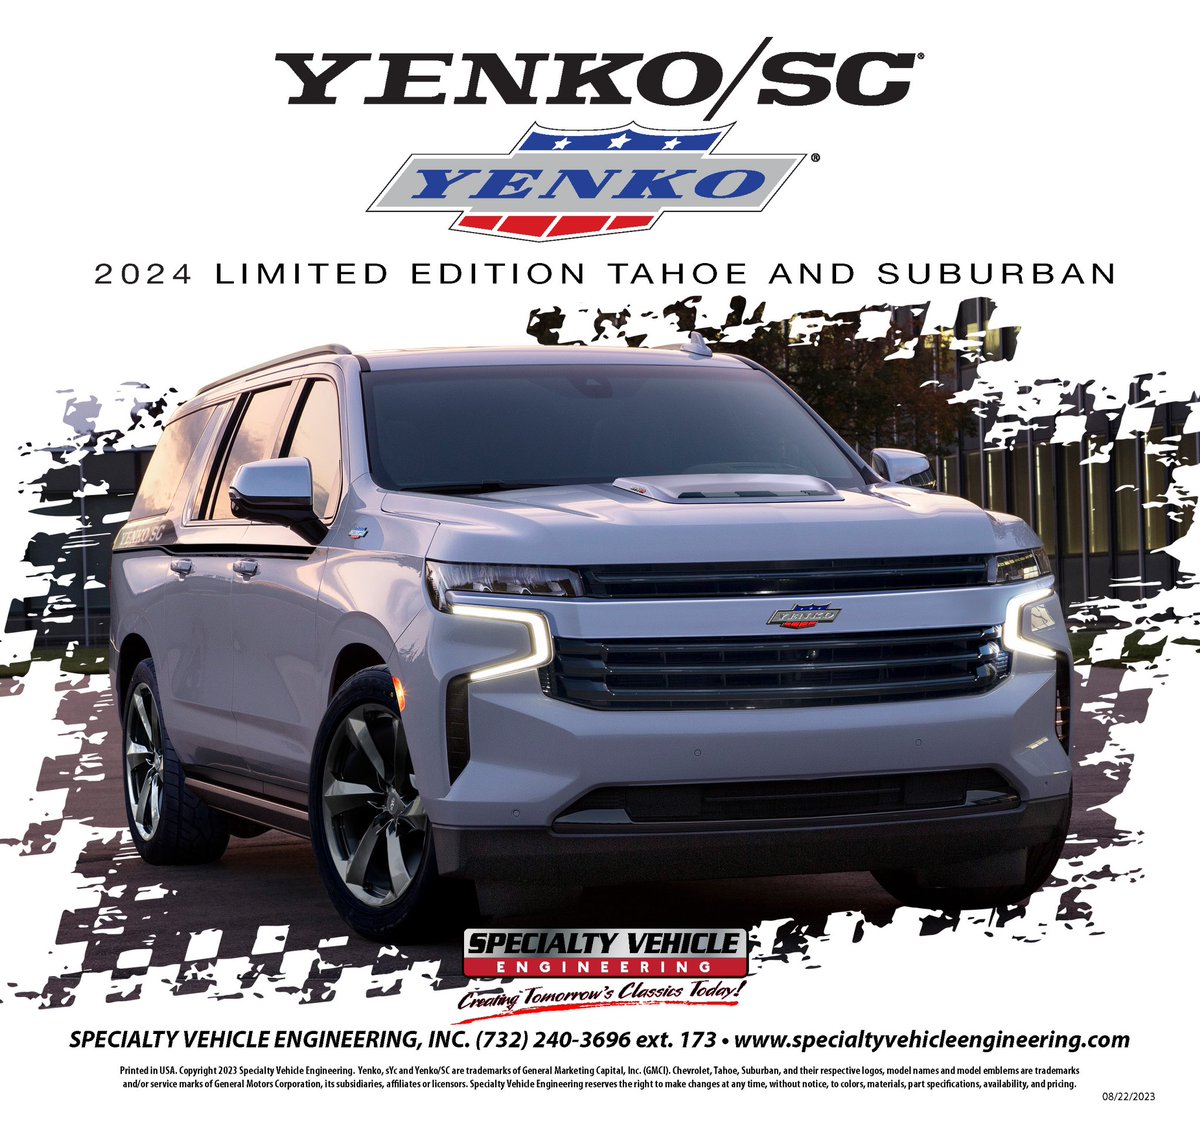 Our 2024 lineup of 700HP & 800HP supercharged Yenko/Sc® #Tahoe & #Suburban - the fastest 2024 Ltd production full-size SUVs in the world.
YENKO® badged Brembo
-Nitto front and rear performance tires
#specialtyvehicleengineering #sportssuv #hamburgersuperchargers #collectible #gm